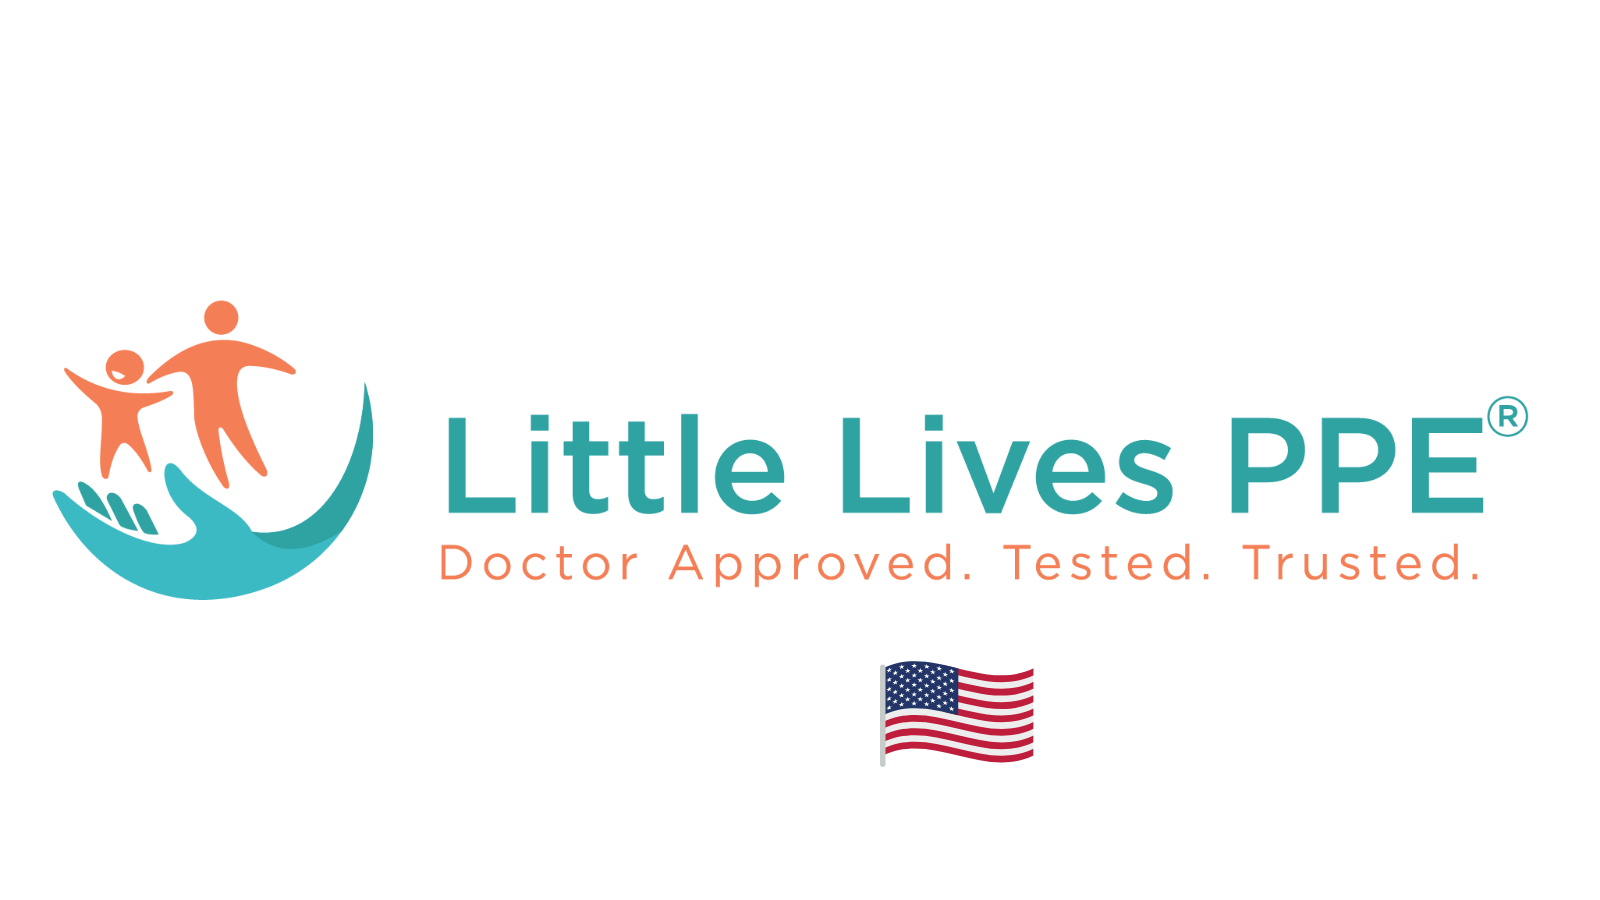 Best Face Masks for Toddlers, Kids, Teens and Adults.  Little Lives PPE.  Tested and Trusted.  US Company